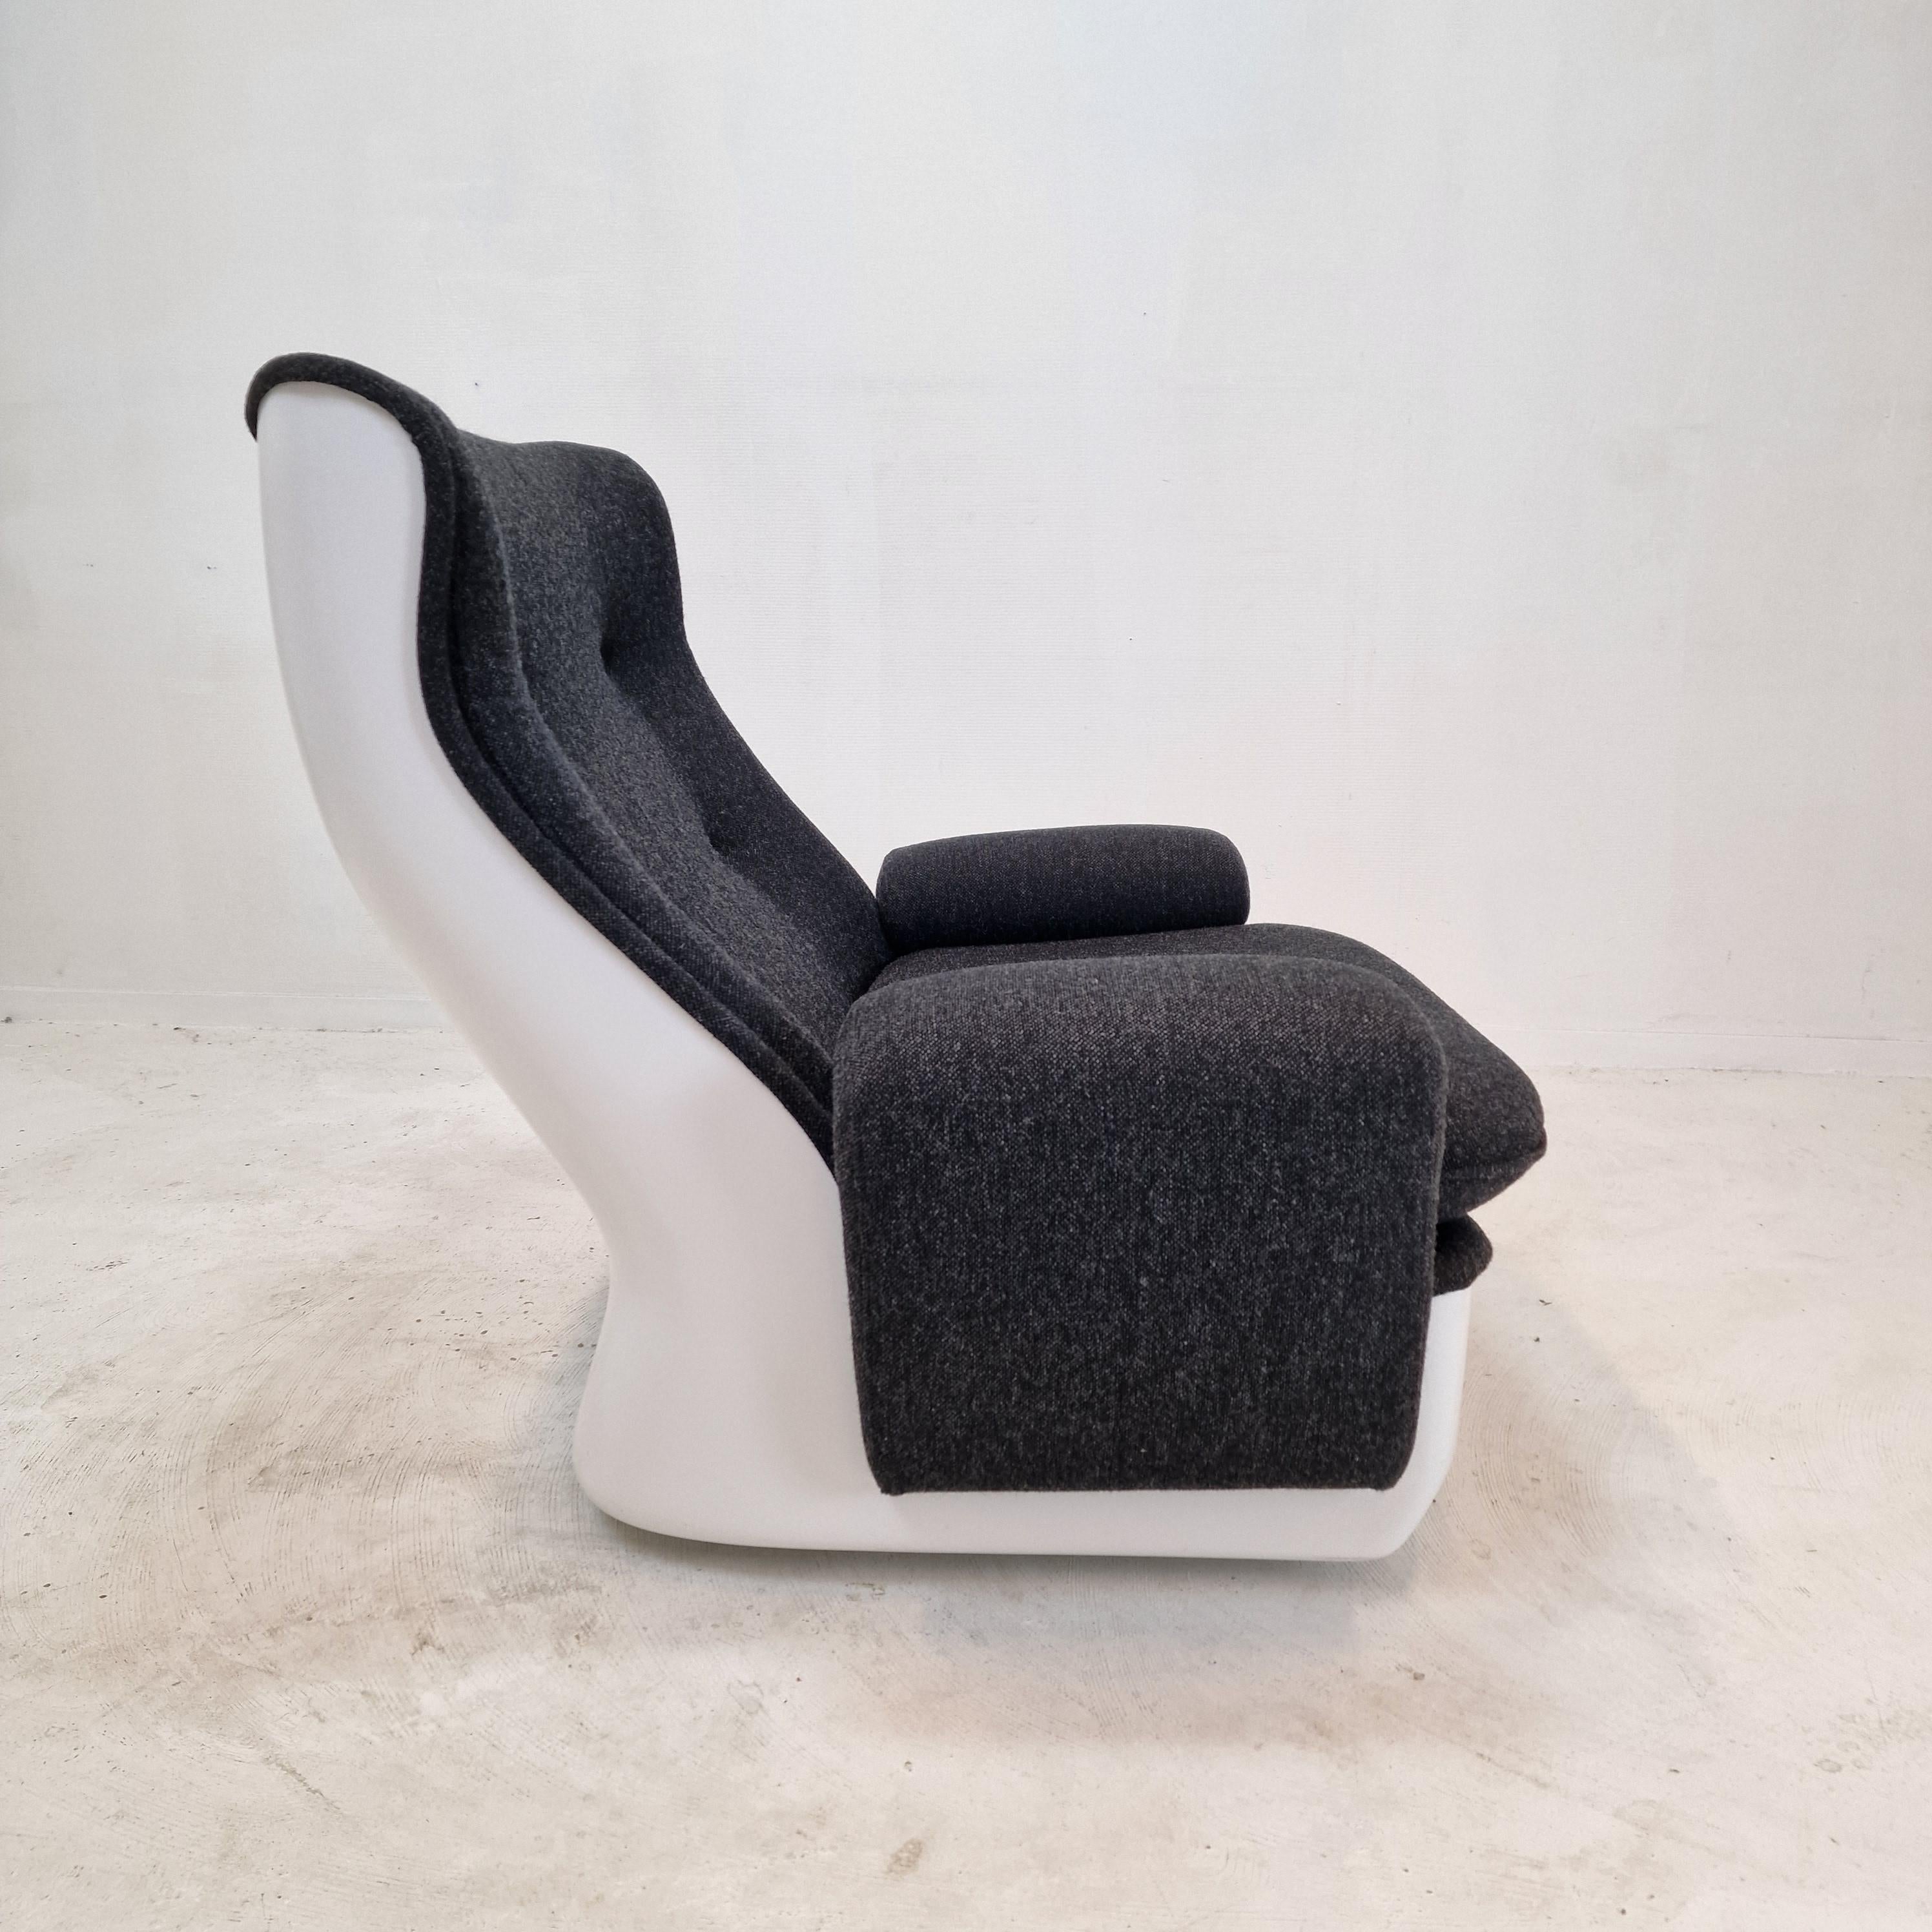 Mid-20th Century “Orchidée” Lounge Chair by Michel Cadestin for Airborne, France, 1968 For Sale